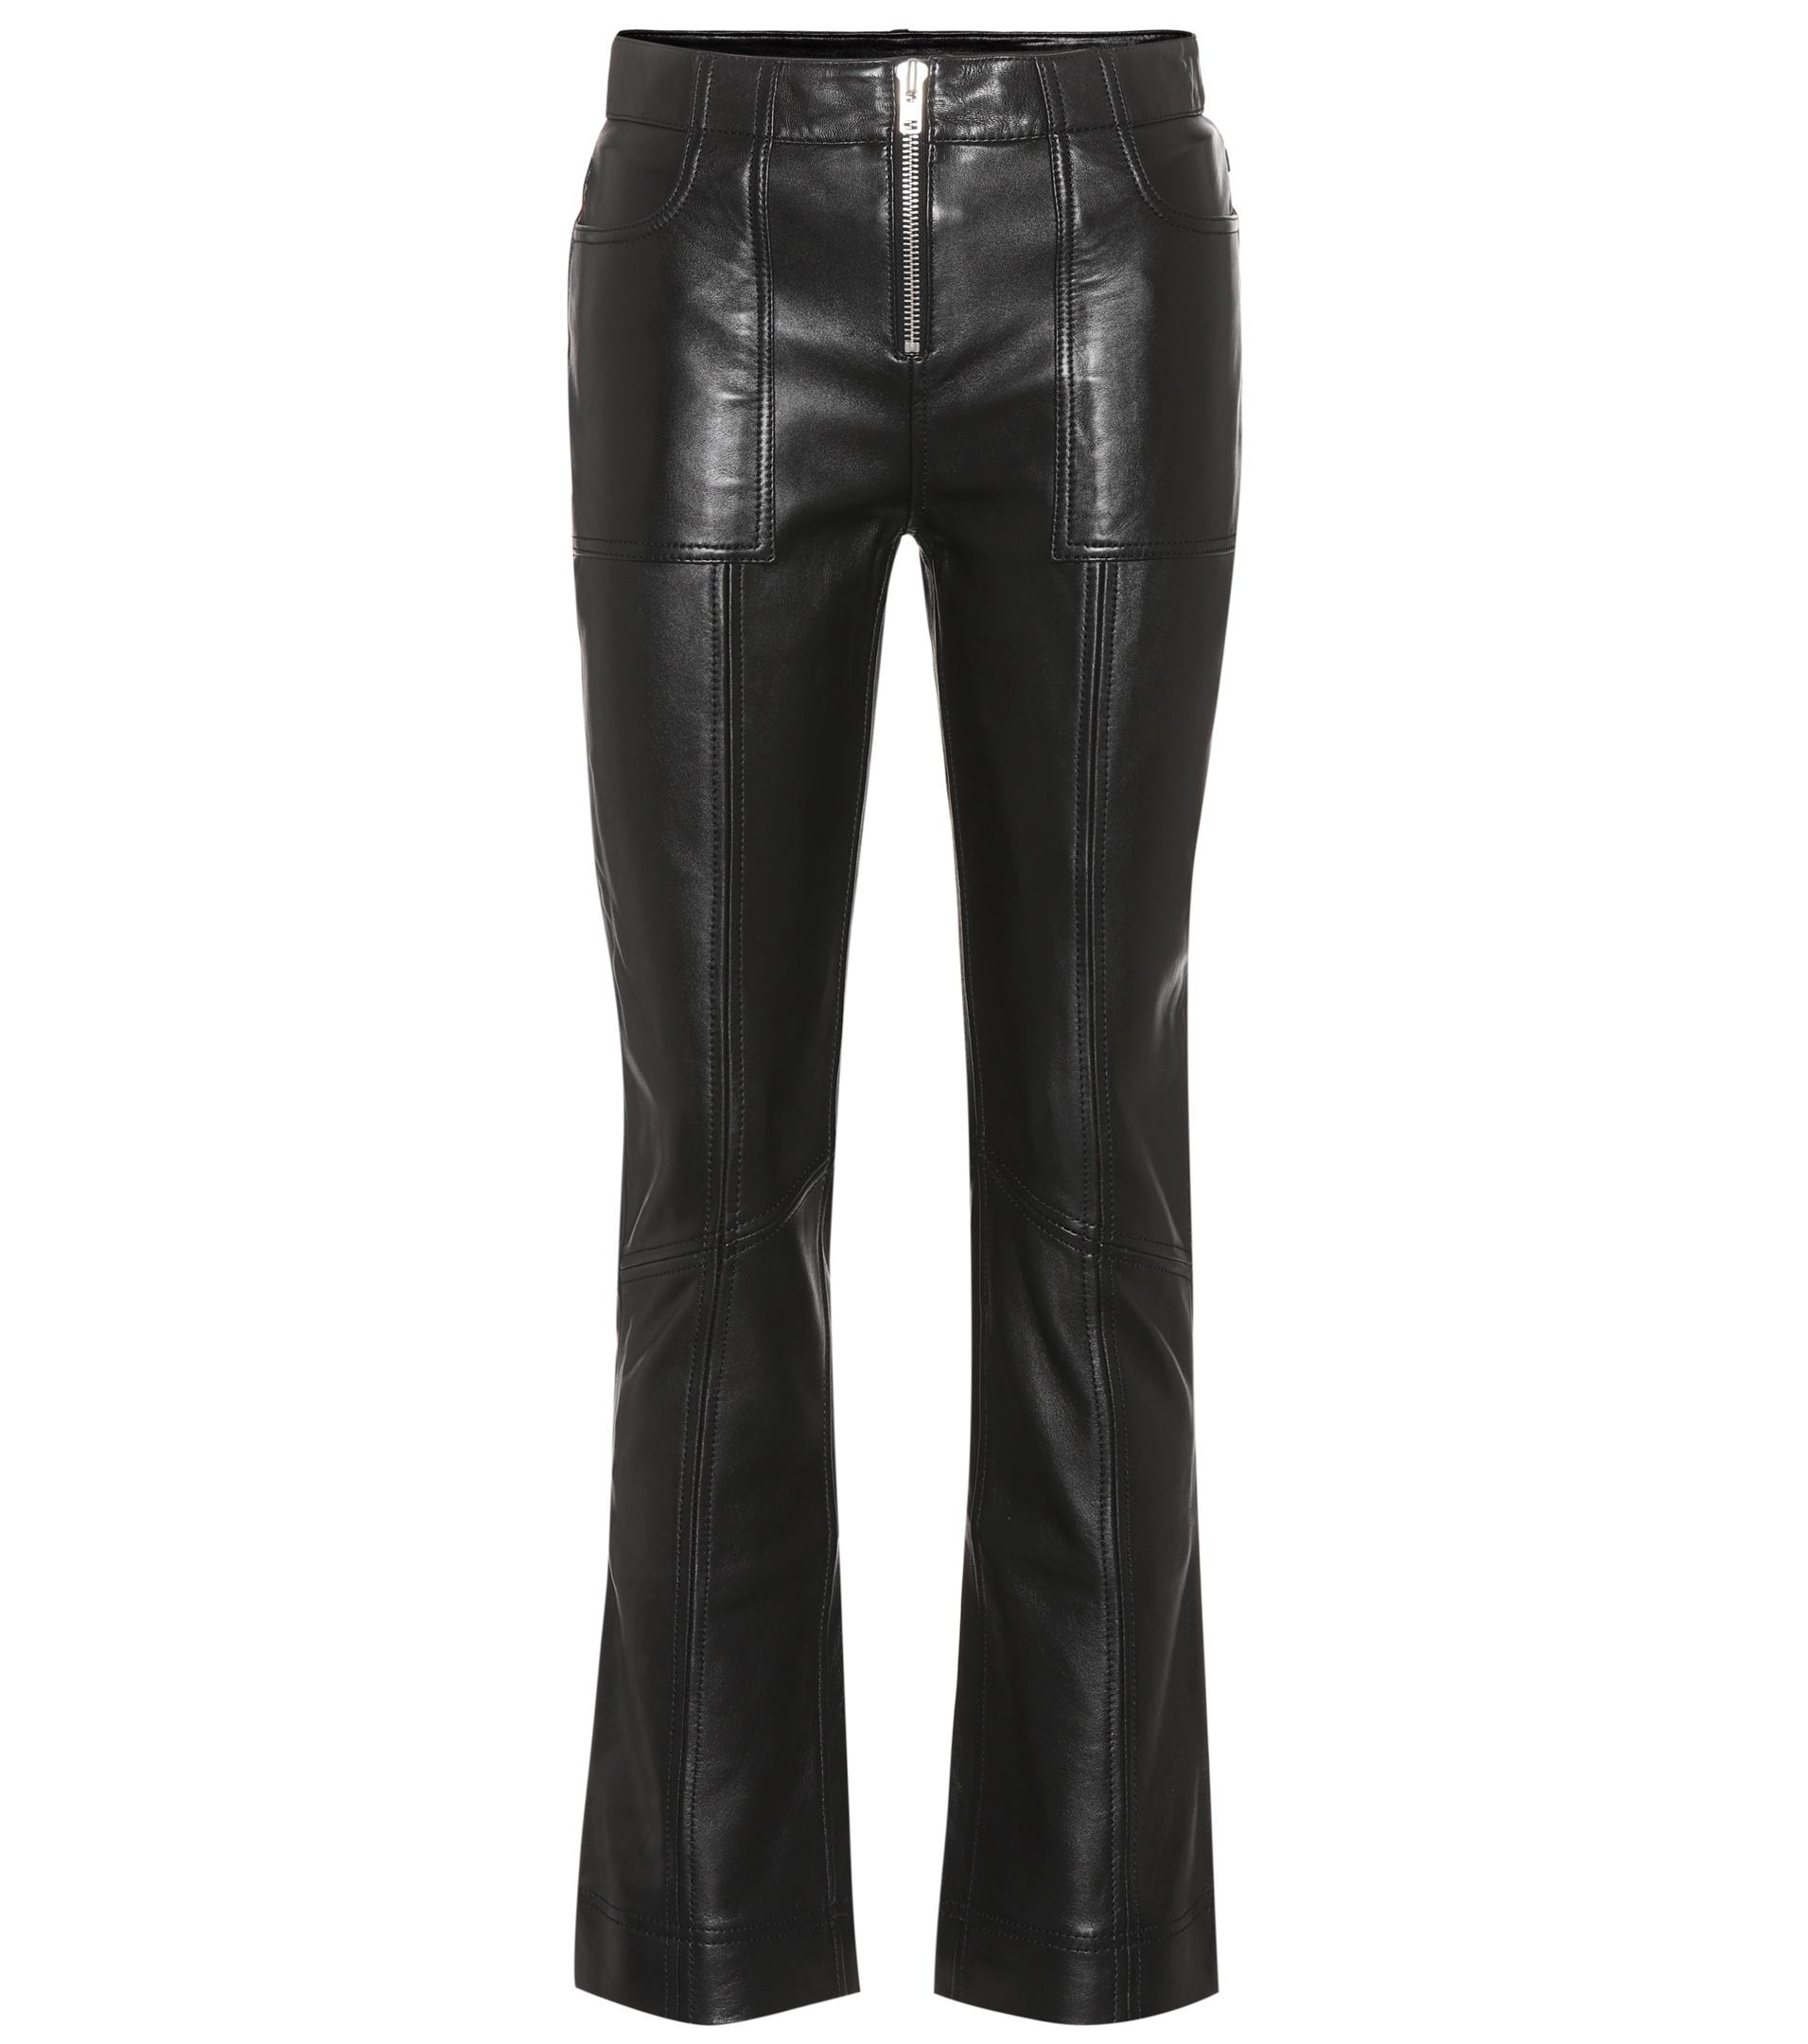 Ganni Passion Leather Trousers in Black - Lyst